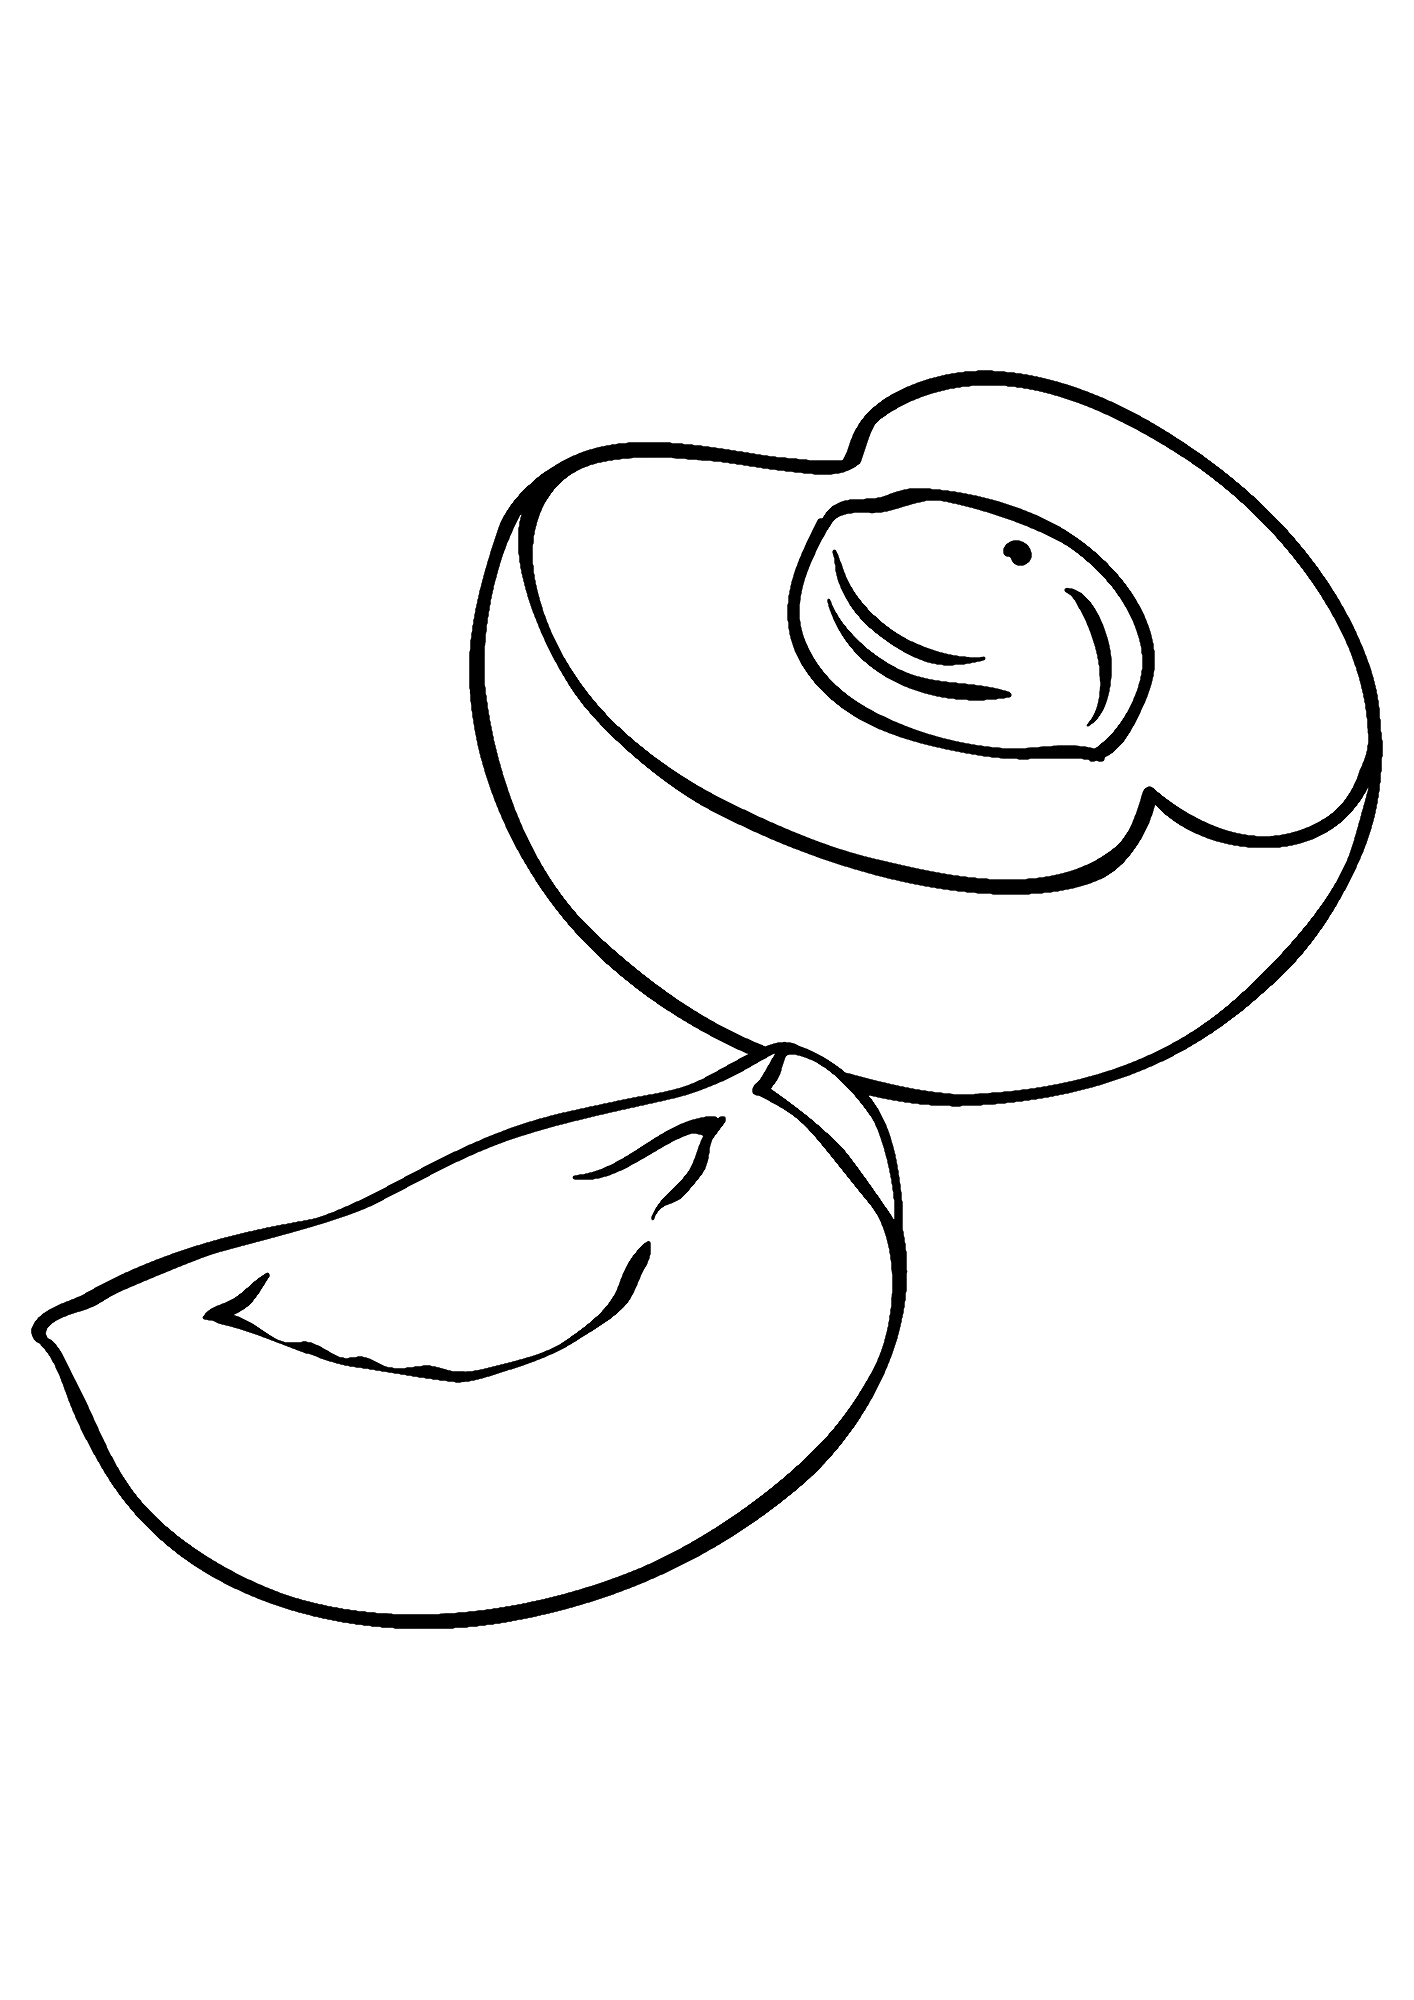 Apricot For Children Coloring Pages